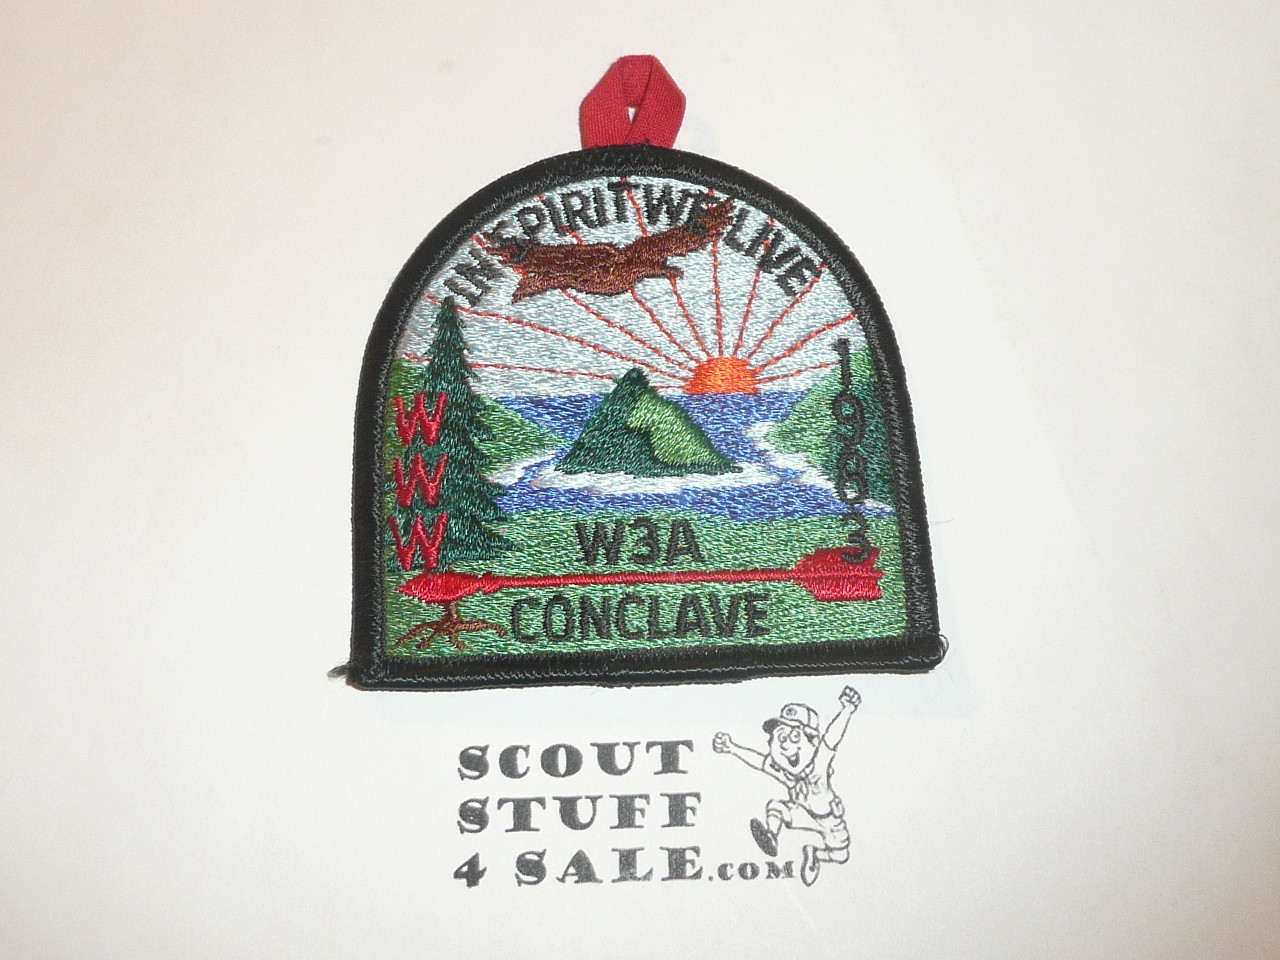 Section W3A 1983 O.A. Conclave STAFF Patch - Scout